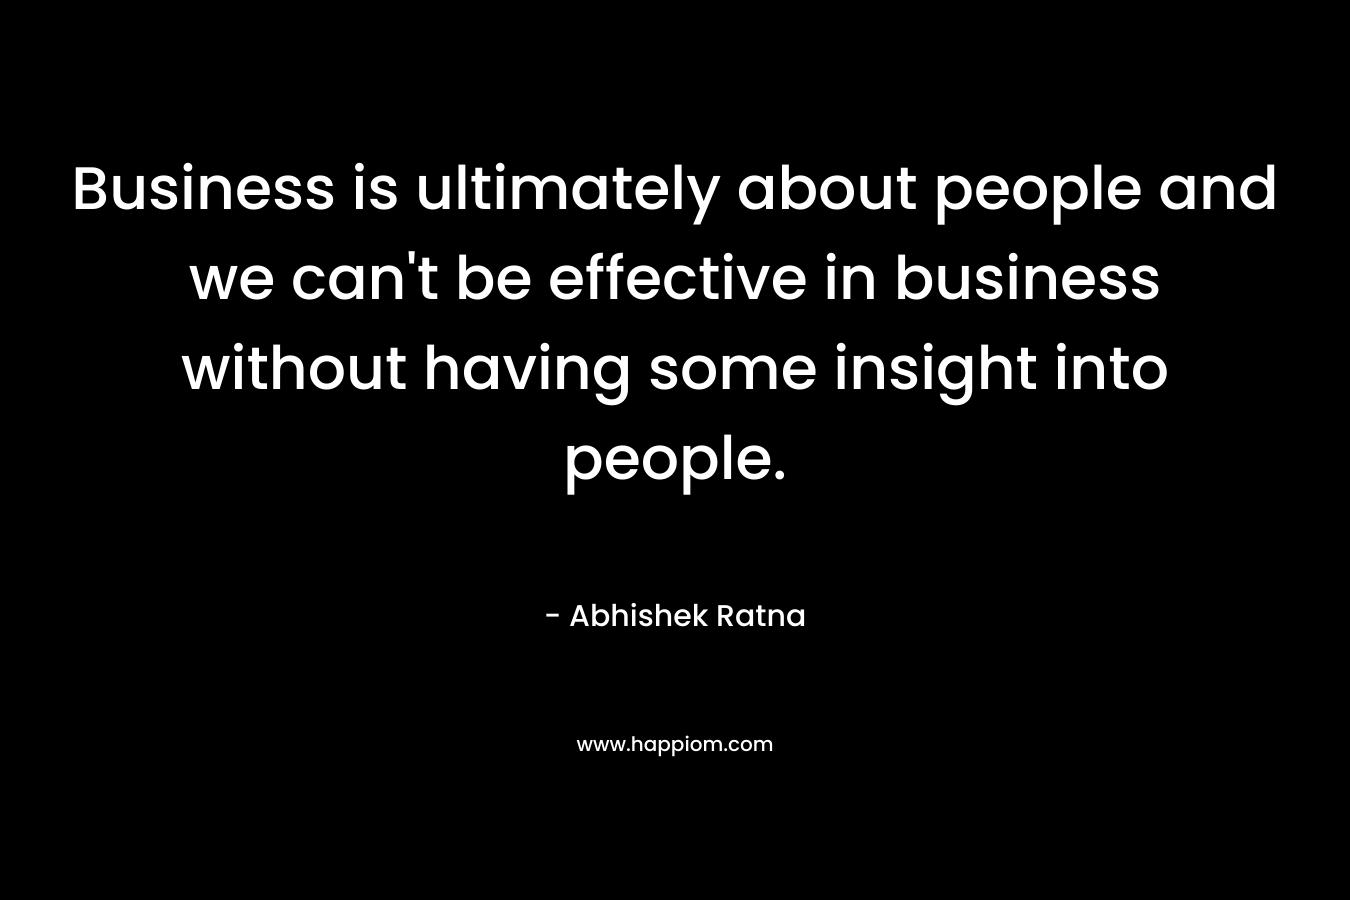 Business is ultimately about people and we can't be effective in business without having some insight into people.